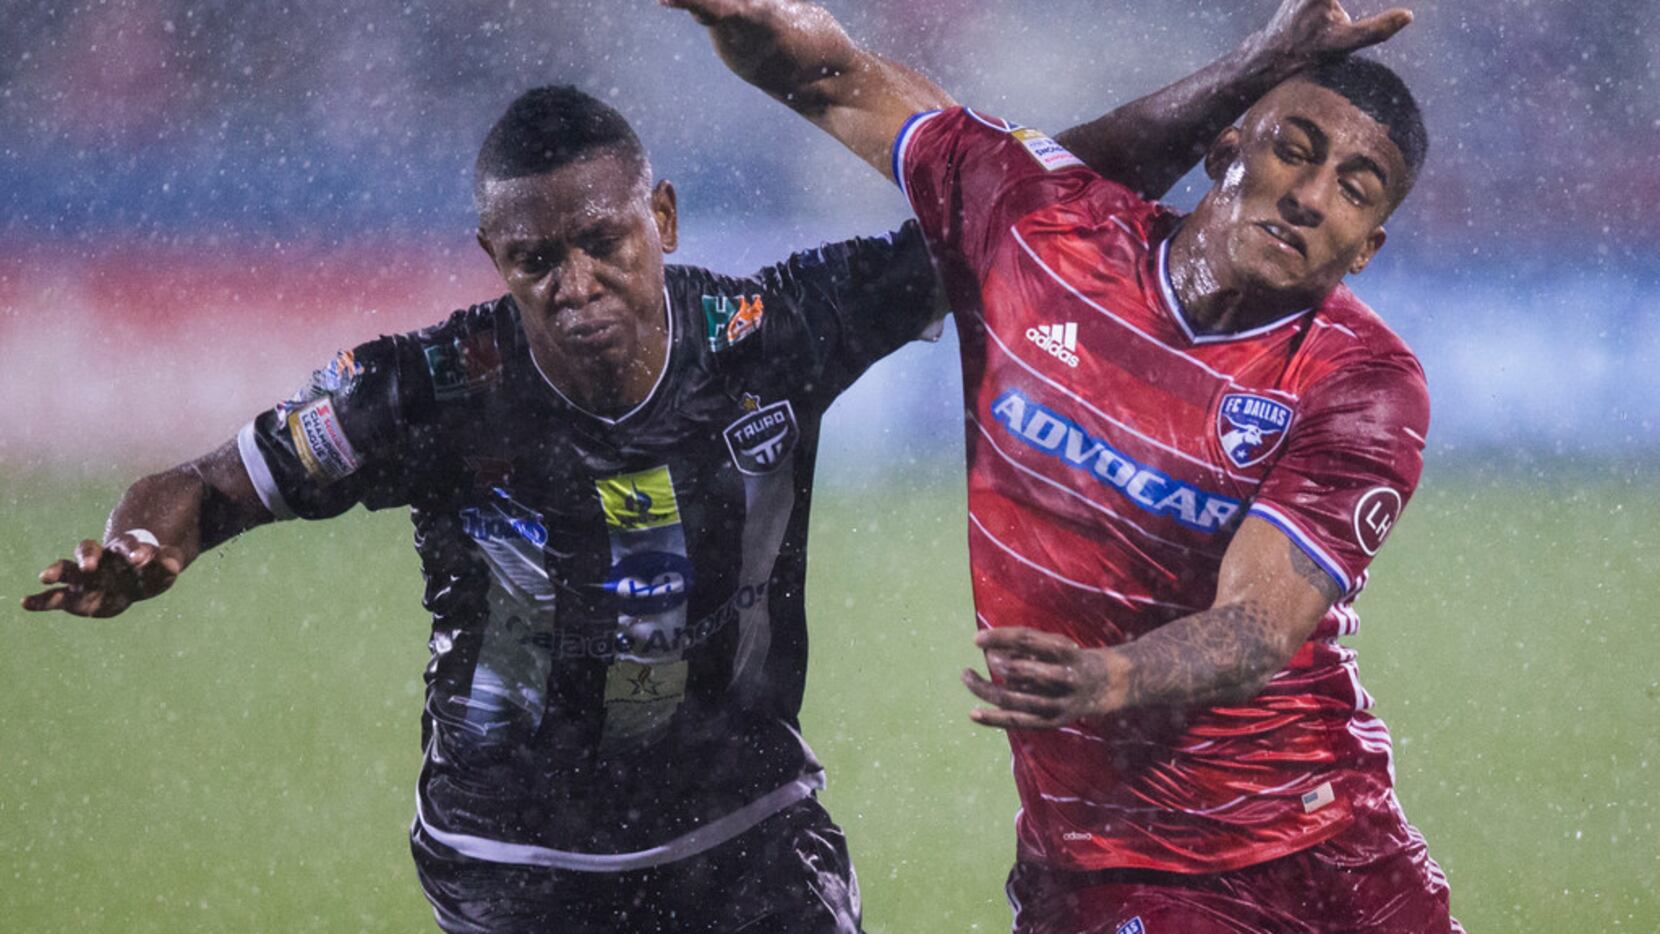 FC Dallas midfielder Santiago Mosquera (11) gets a hand to the face from Tauro F.C.'s...